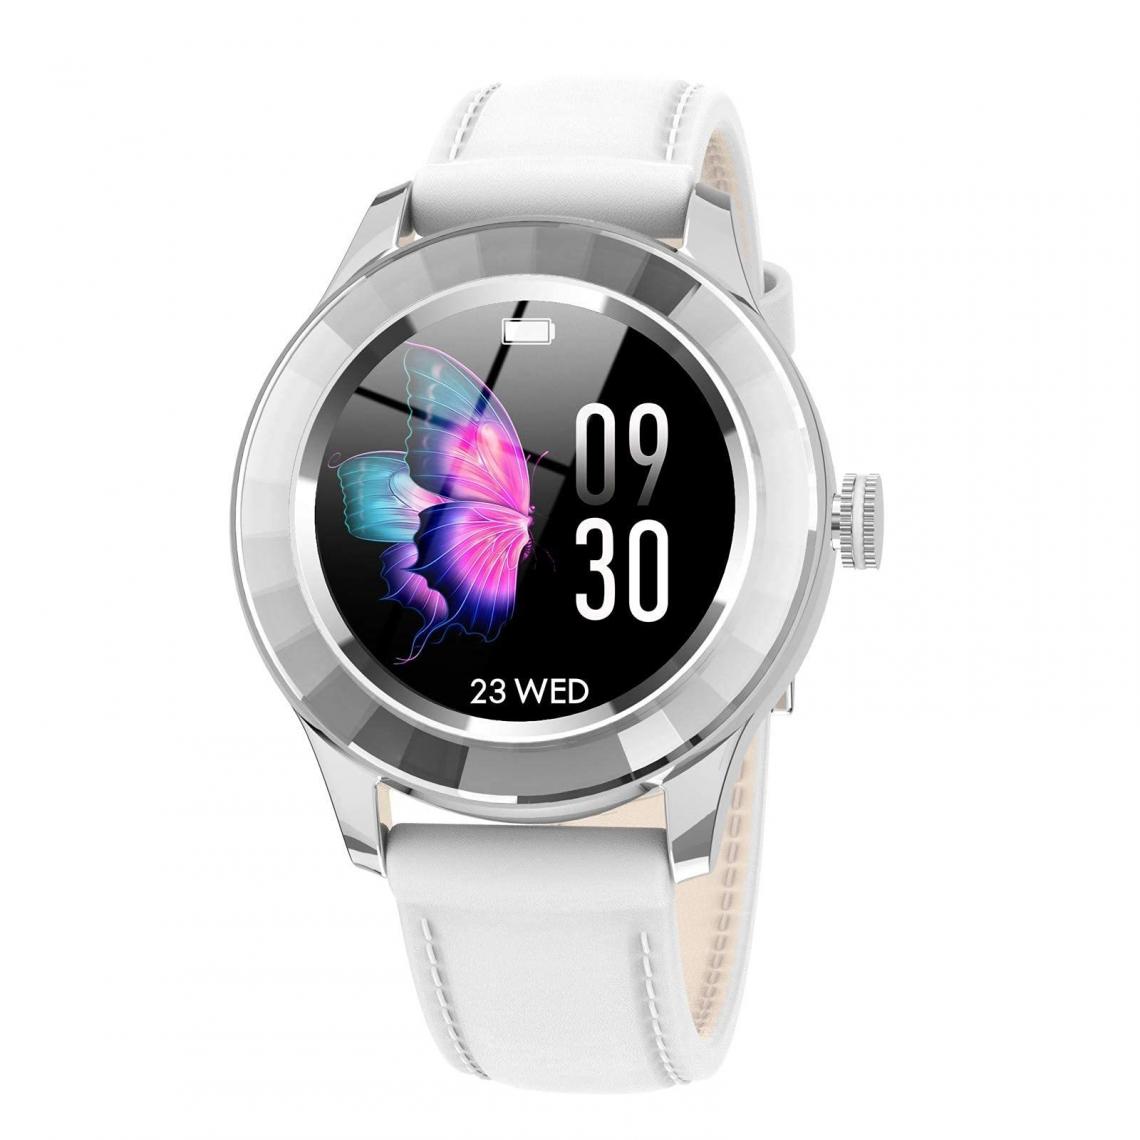 Chronotech Montres - Chronus Connected Watch Bluetooth SmartWatch -Bluetooth Smart Watch is waterproof with Heart temperature monitoring(White) - Montre connectée